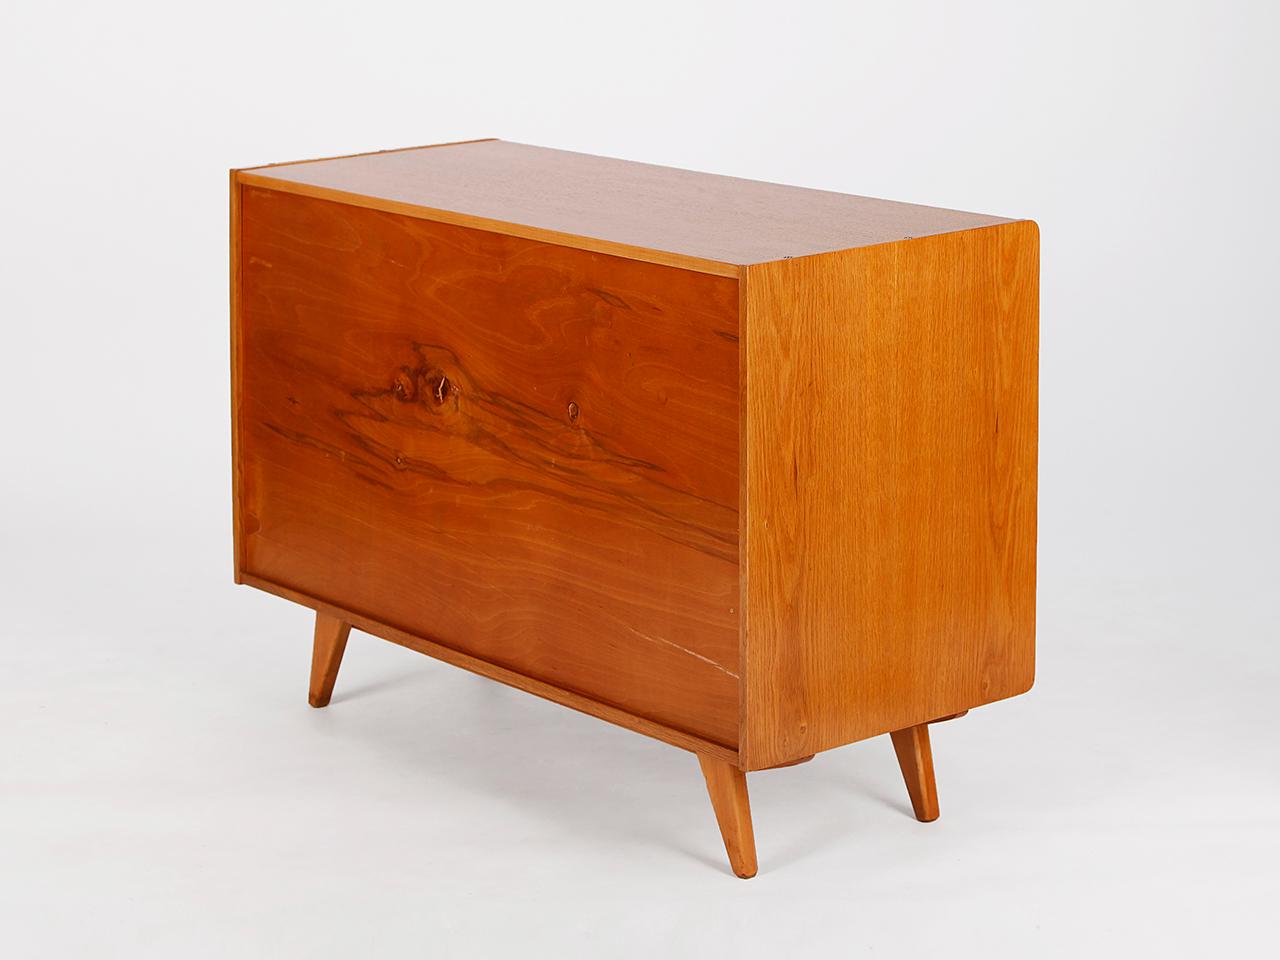 Sideboard U 453 by Jiri Jiroutek for Interior Praha with Wooden Drawers, 1960s In Excellent Condition For Sale In Wien, AT